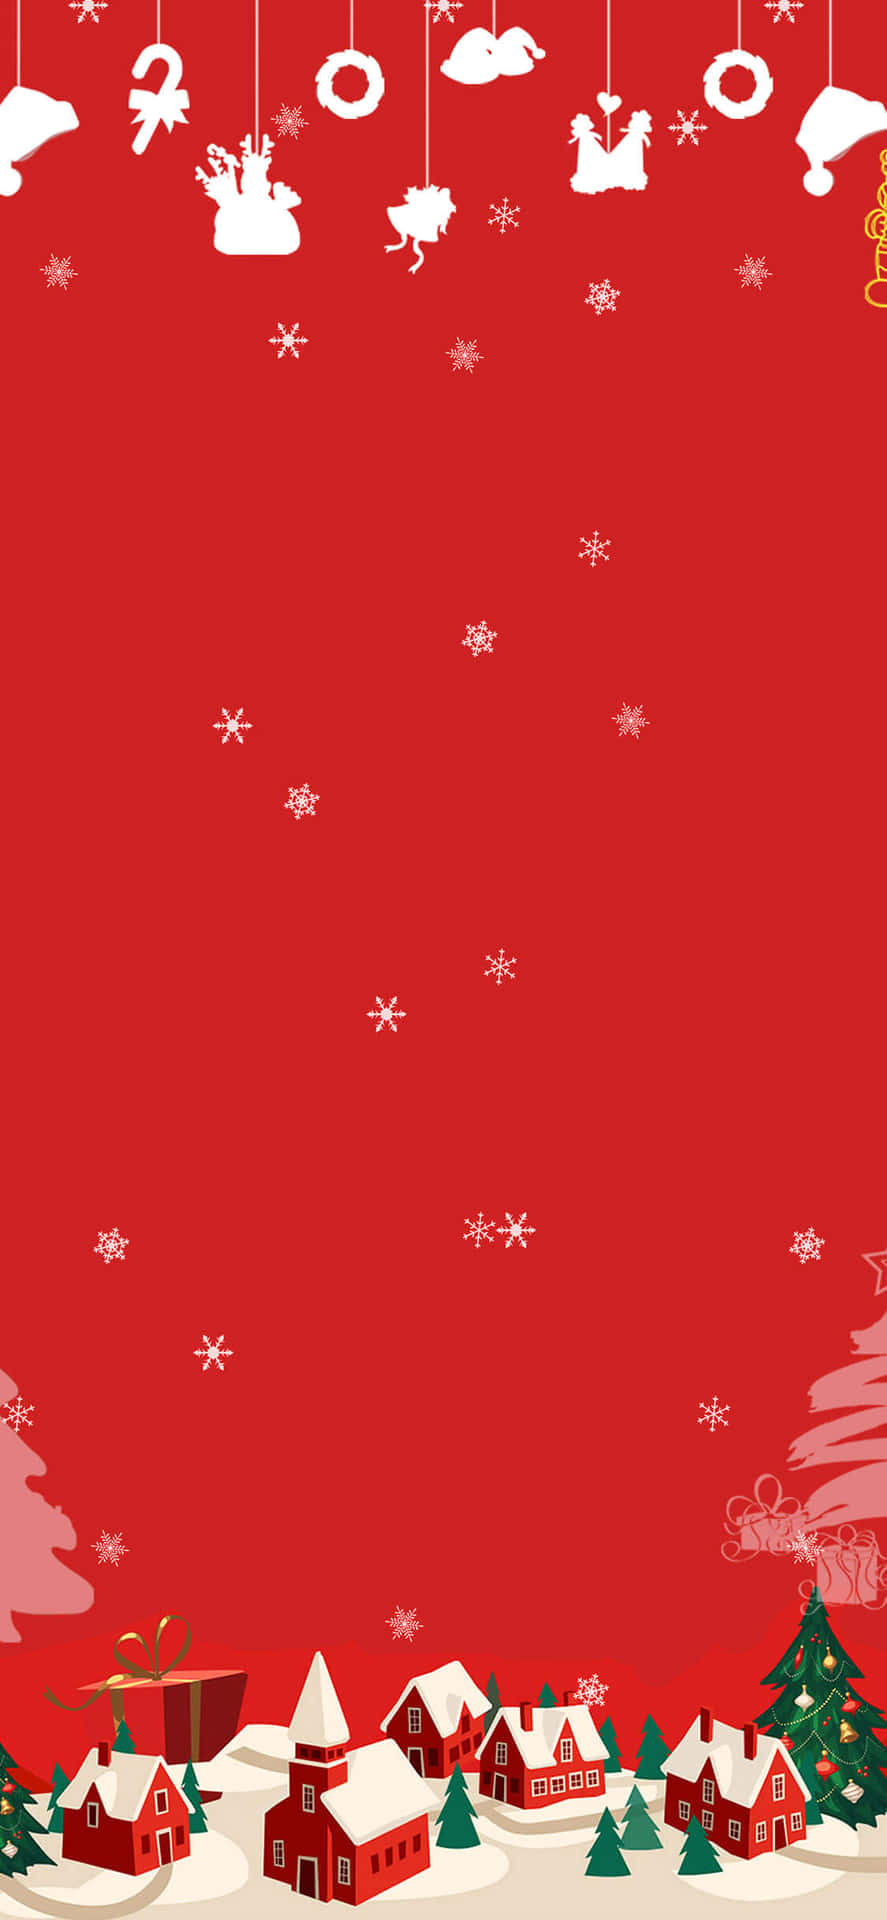 Christmas Background With Santa Claus And Snowflakes Wallpaper